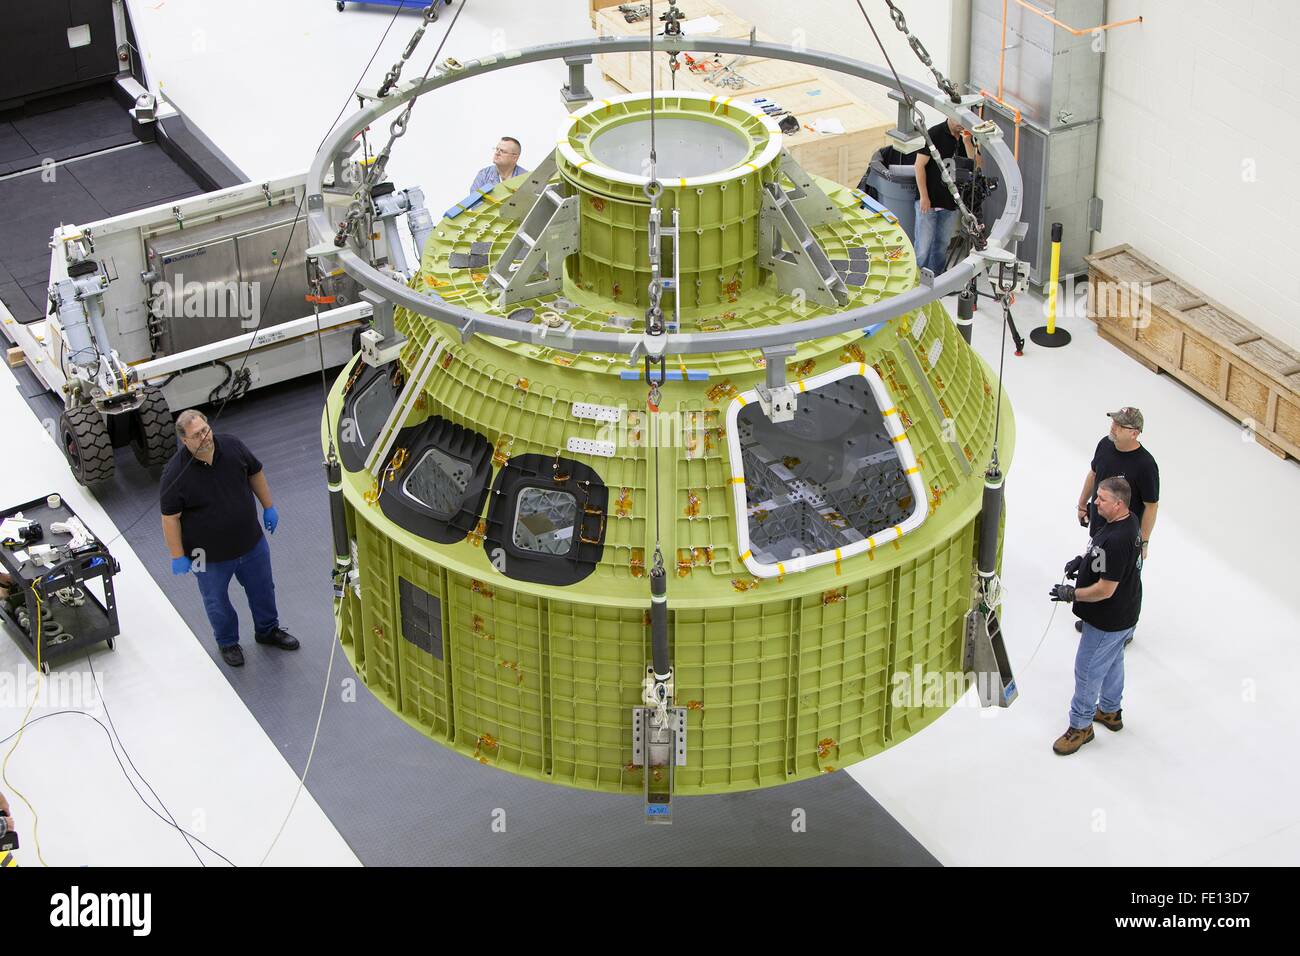 Cape Canaveral, Florida, USA. 02nd Feb, 2016. The Orion Multi-Purpose Crew module pressure vessel capsule project EM-1 is lifted by crane inside the Neil Armstrong Operations and Checkout Building at the Kennedy Space Center February 2, 2016 in Cape Canaveral, Florida. The Orion spacecraft will launch atop NASA Space Launch System rocket on EM-1, an un-crewed test flight in 2018. Stock Photo